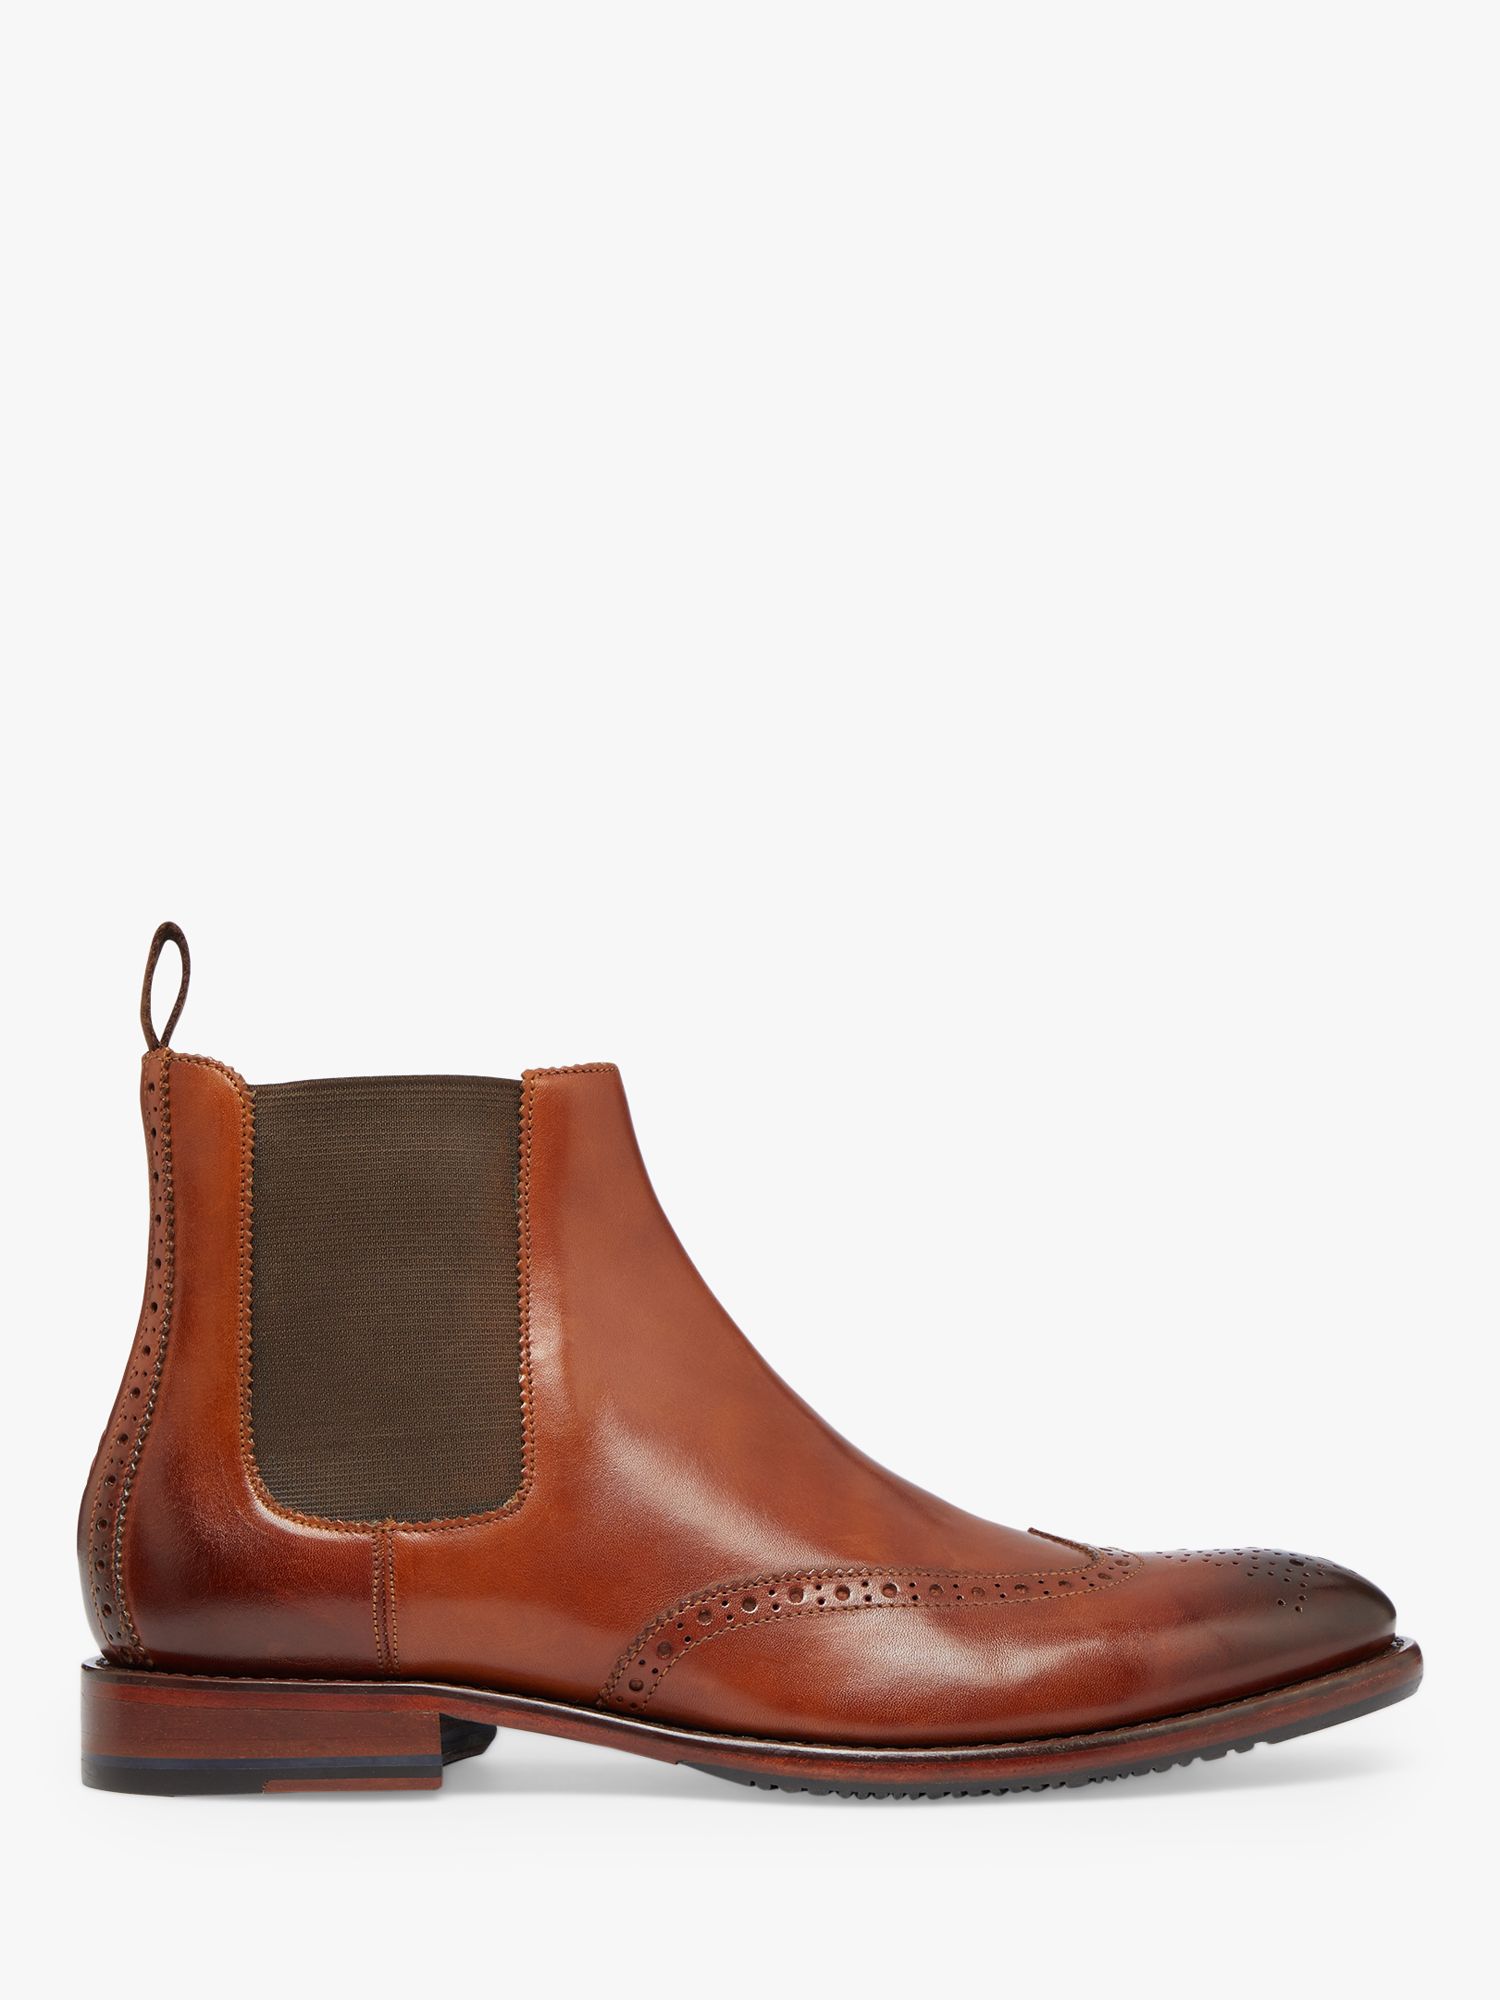 Oliver Sweeney Portrush Antiqued Leather Chelsea Boots, Tan